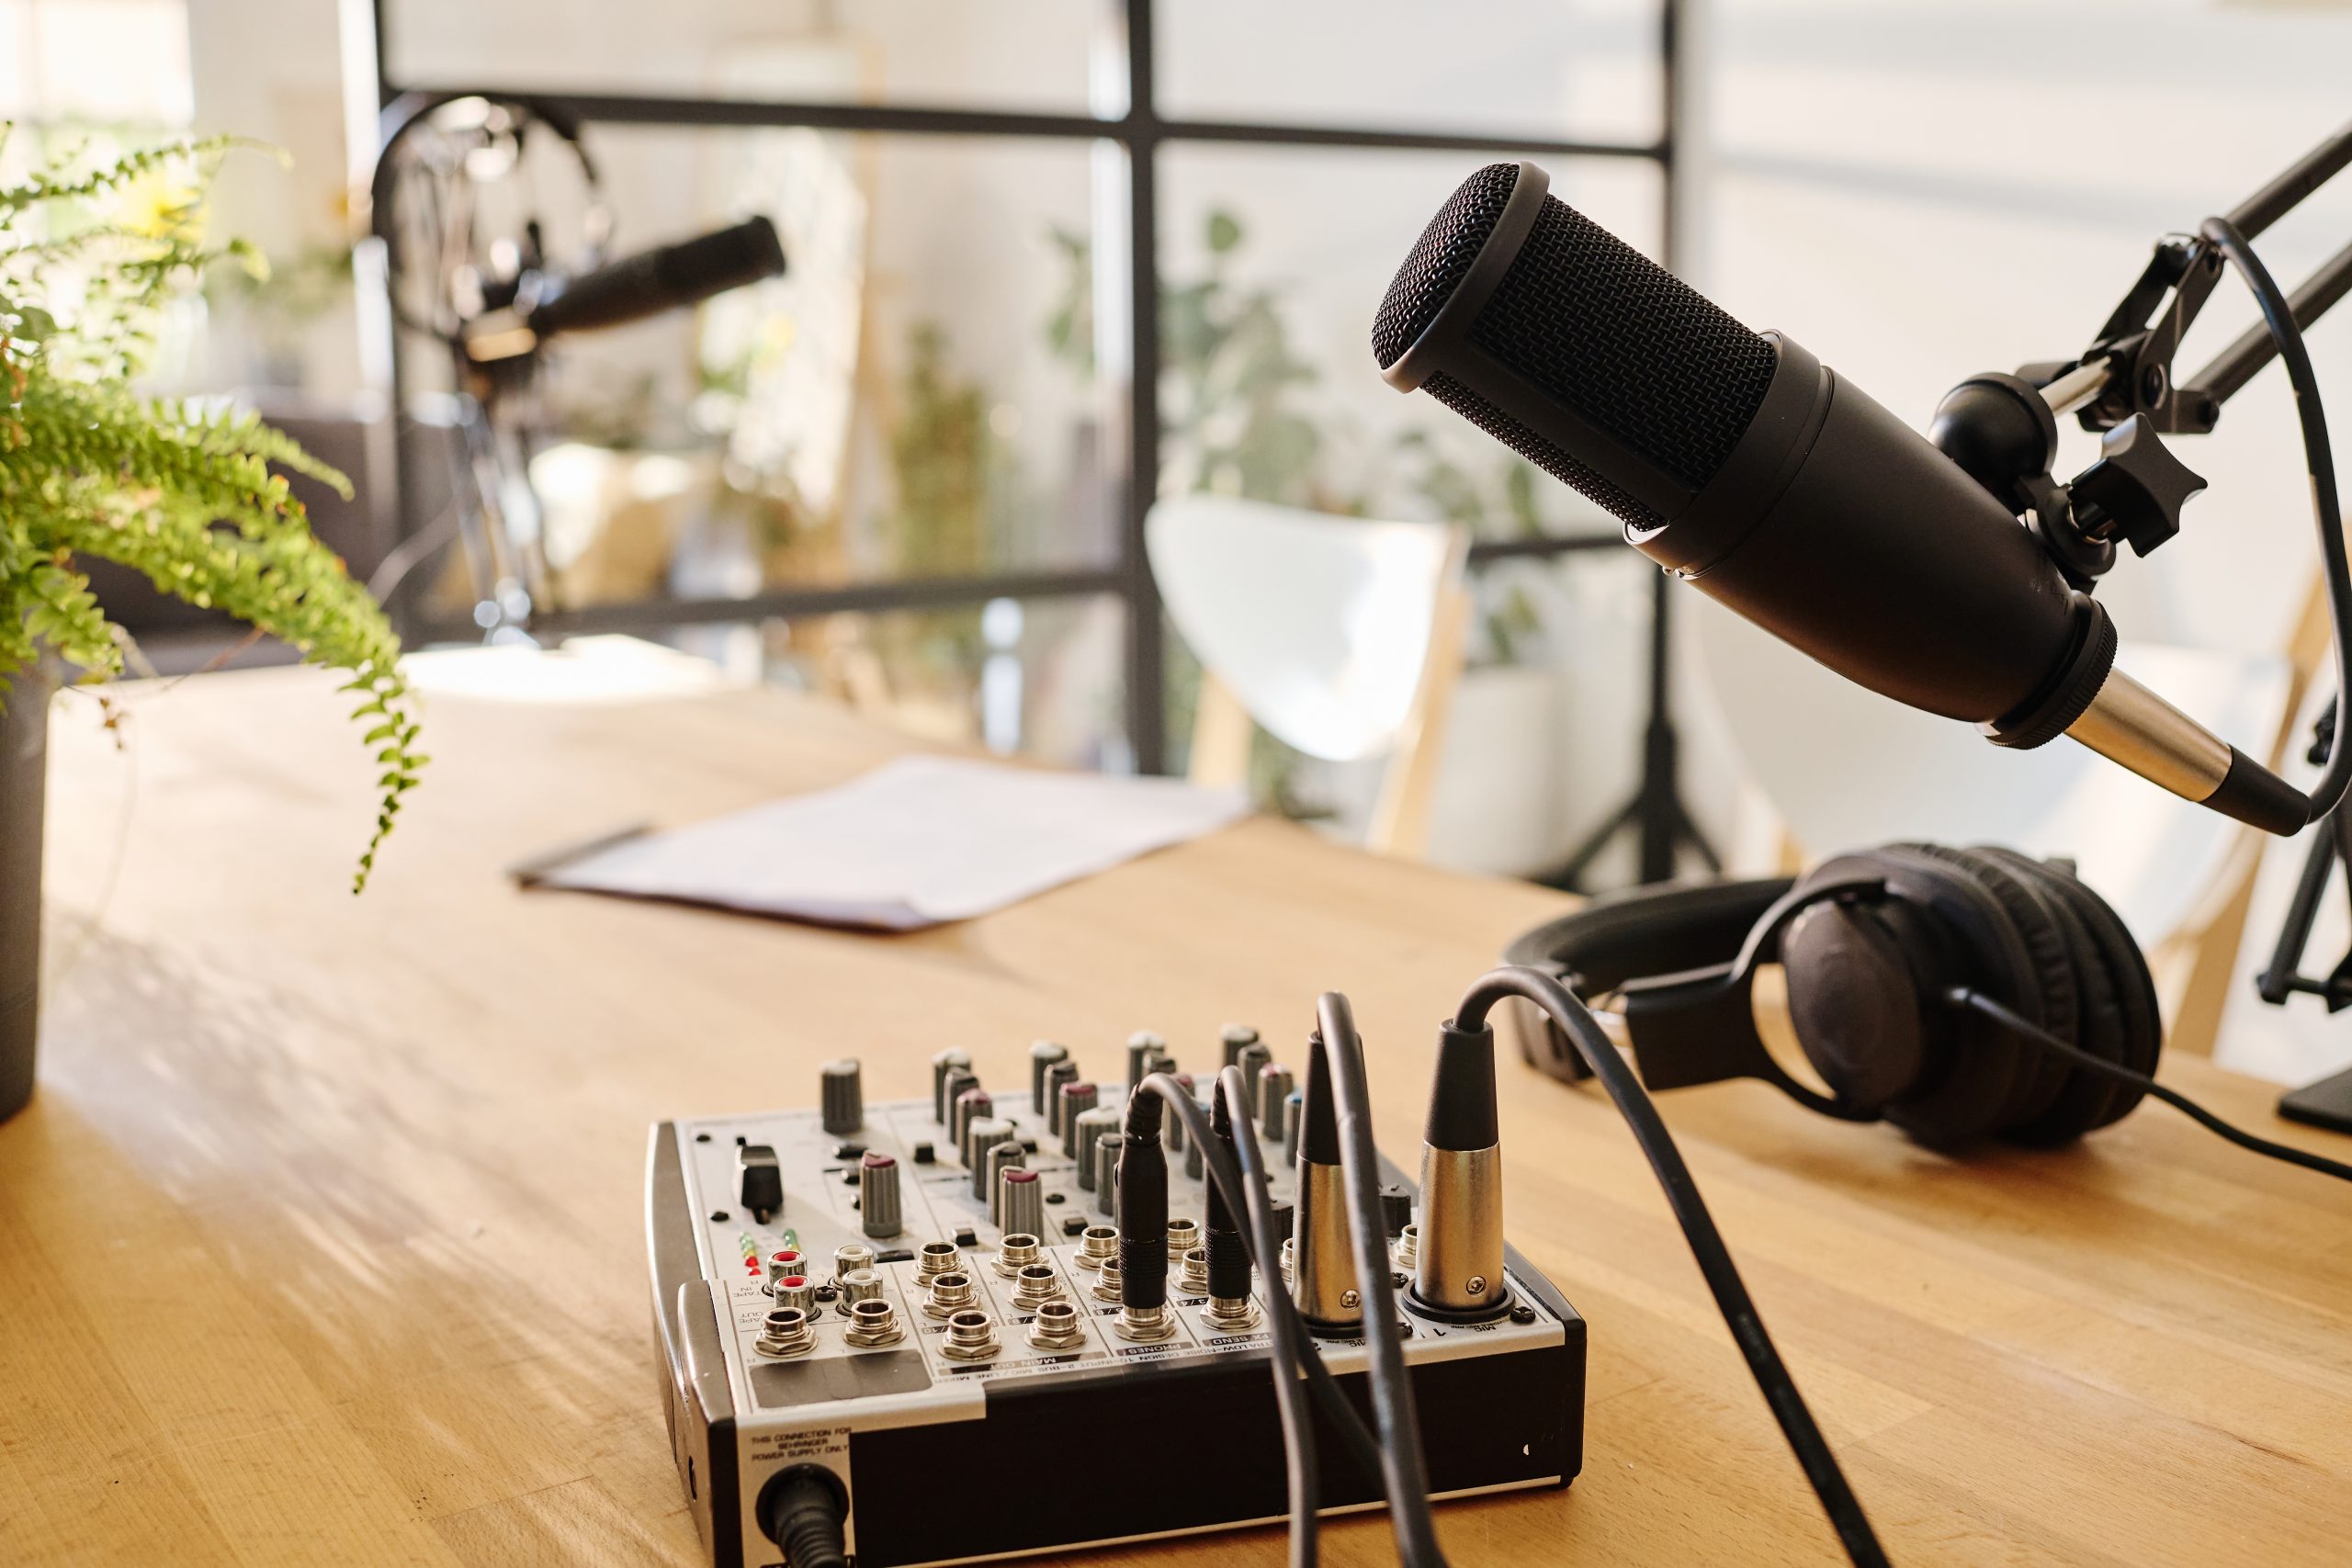 Video Podcast Equipment: What You Need to Get Started - 42West